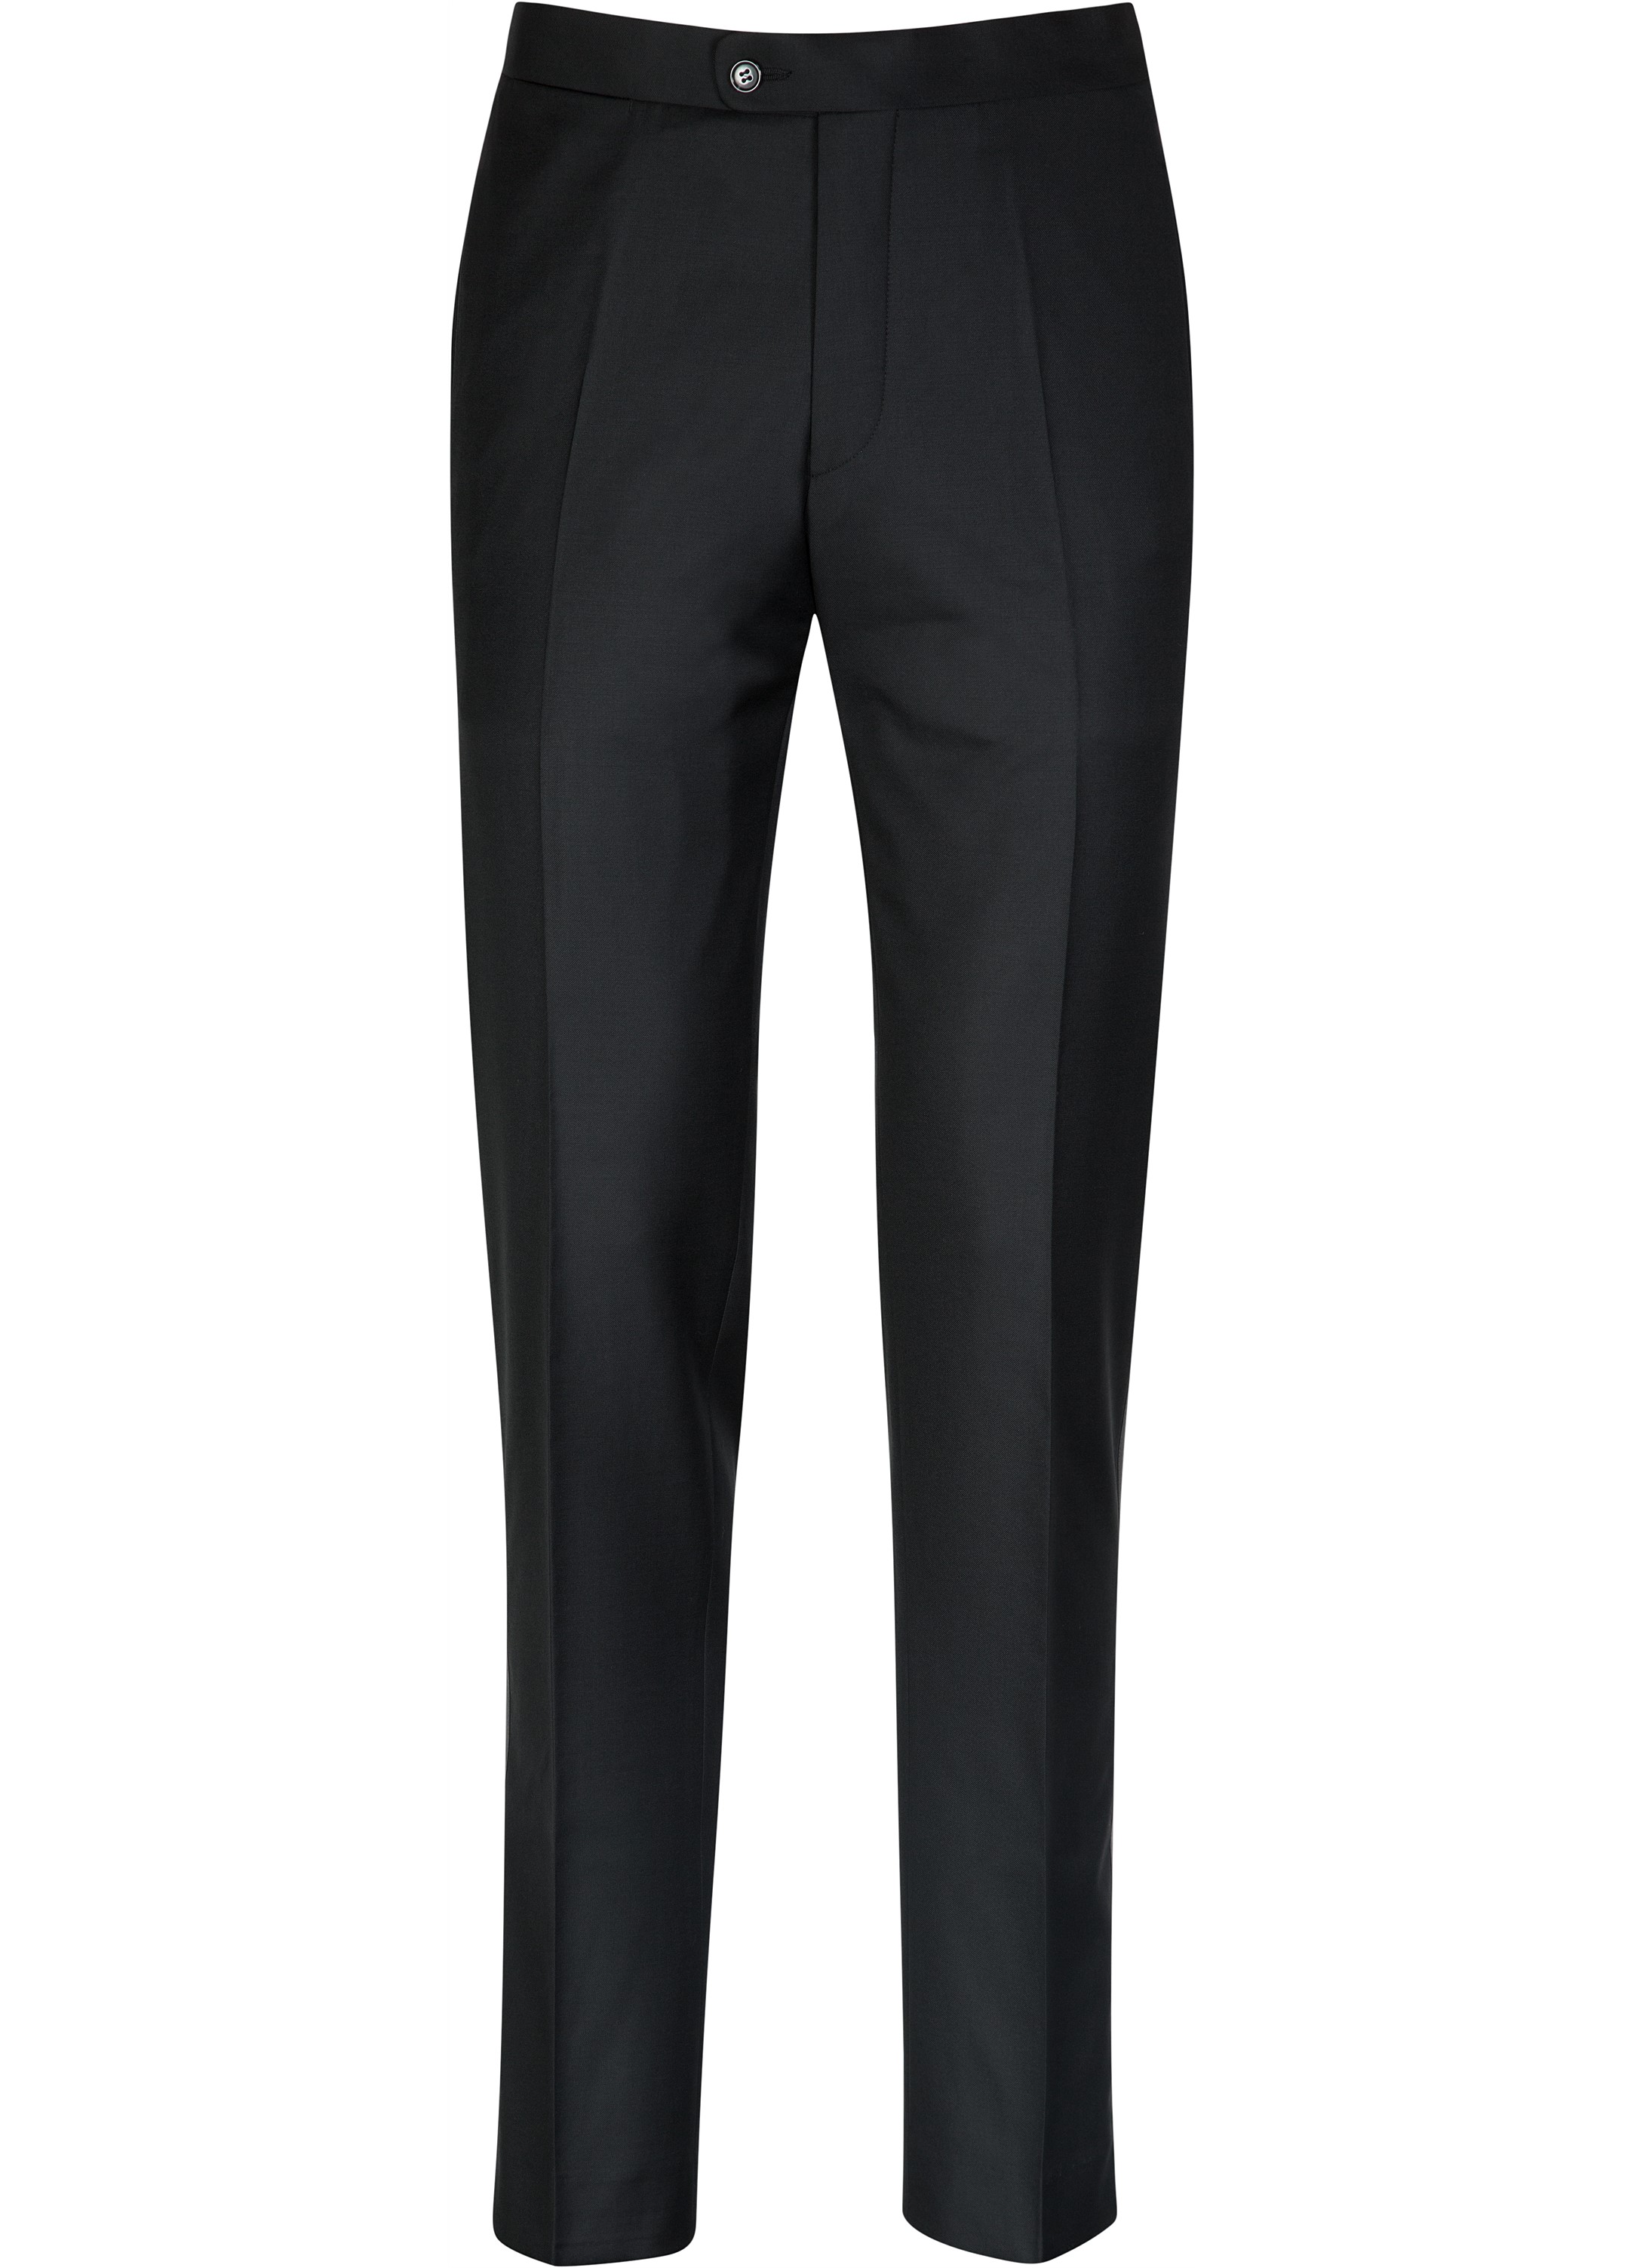 Black Smoking Trousers B1199i | Suitsupply Online Store